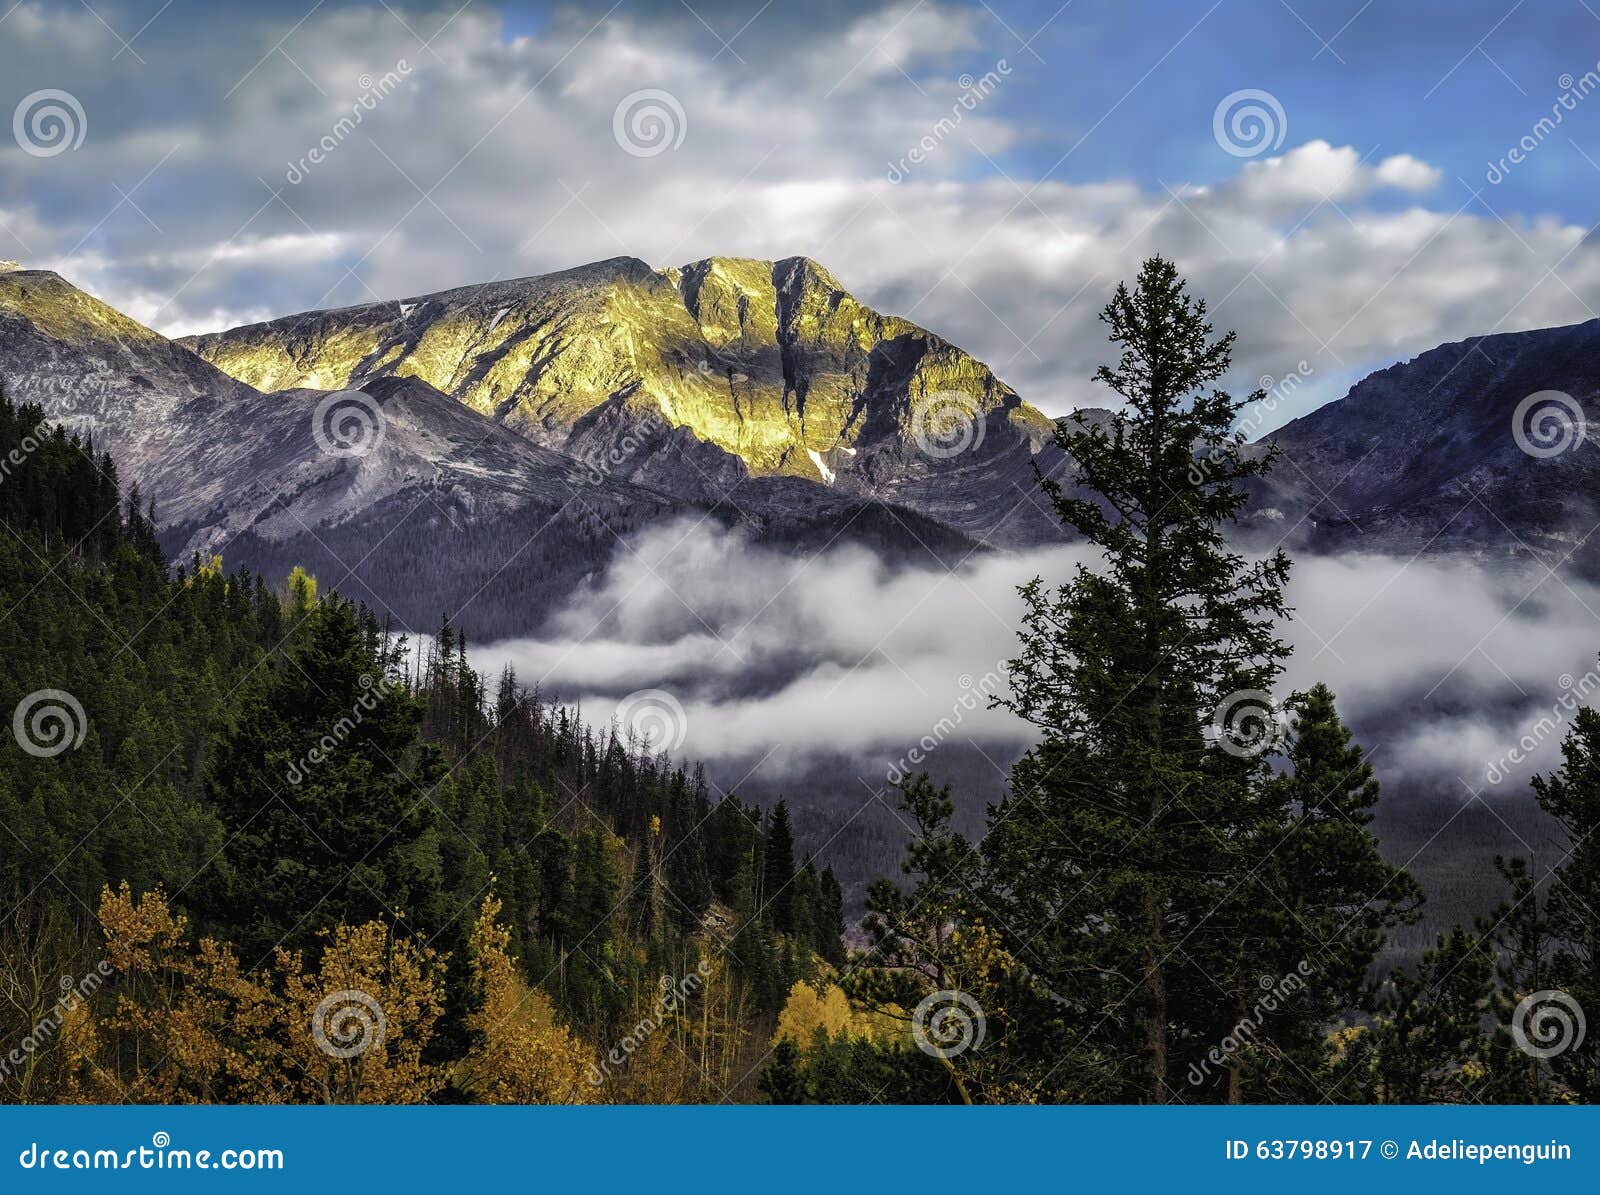 rocky mountain national park with fall colors